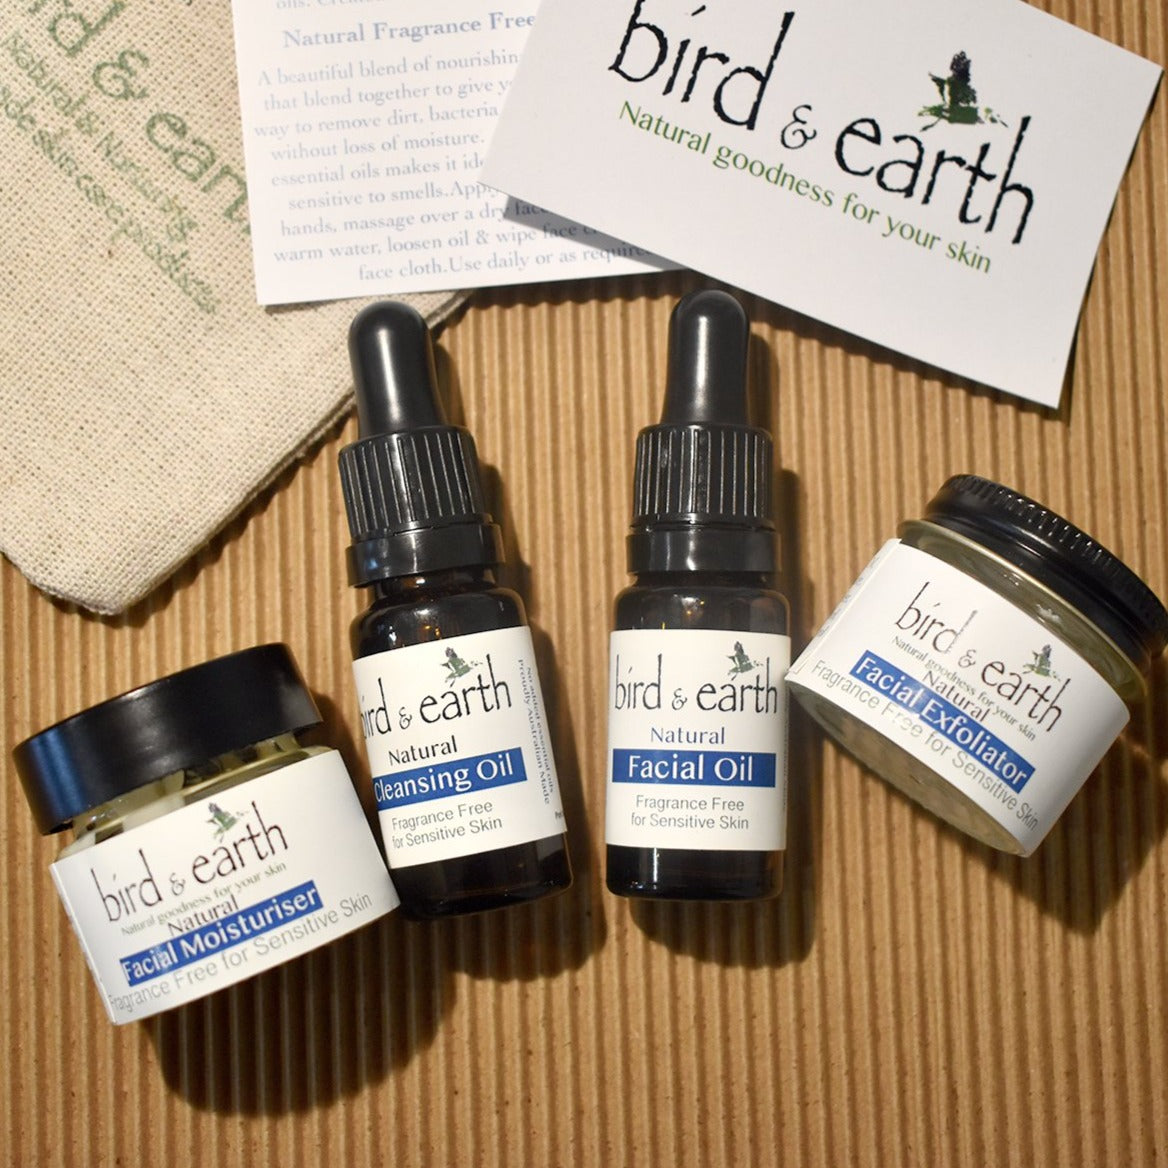 Women and Men skincare travel/pamper packs Offer - Bird and Earth